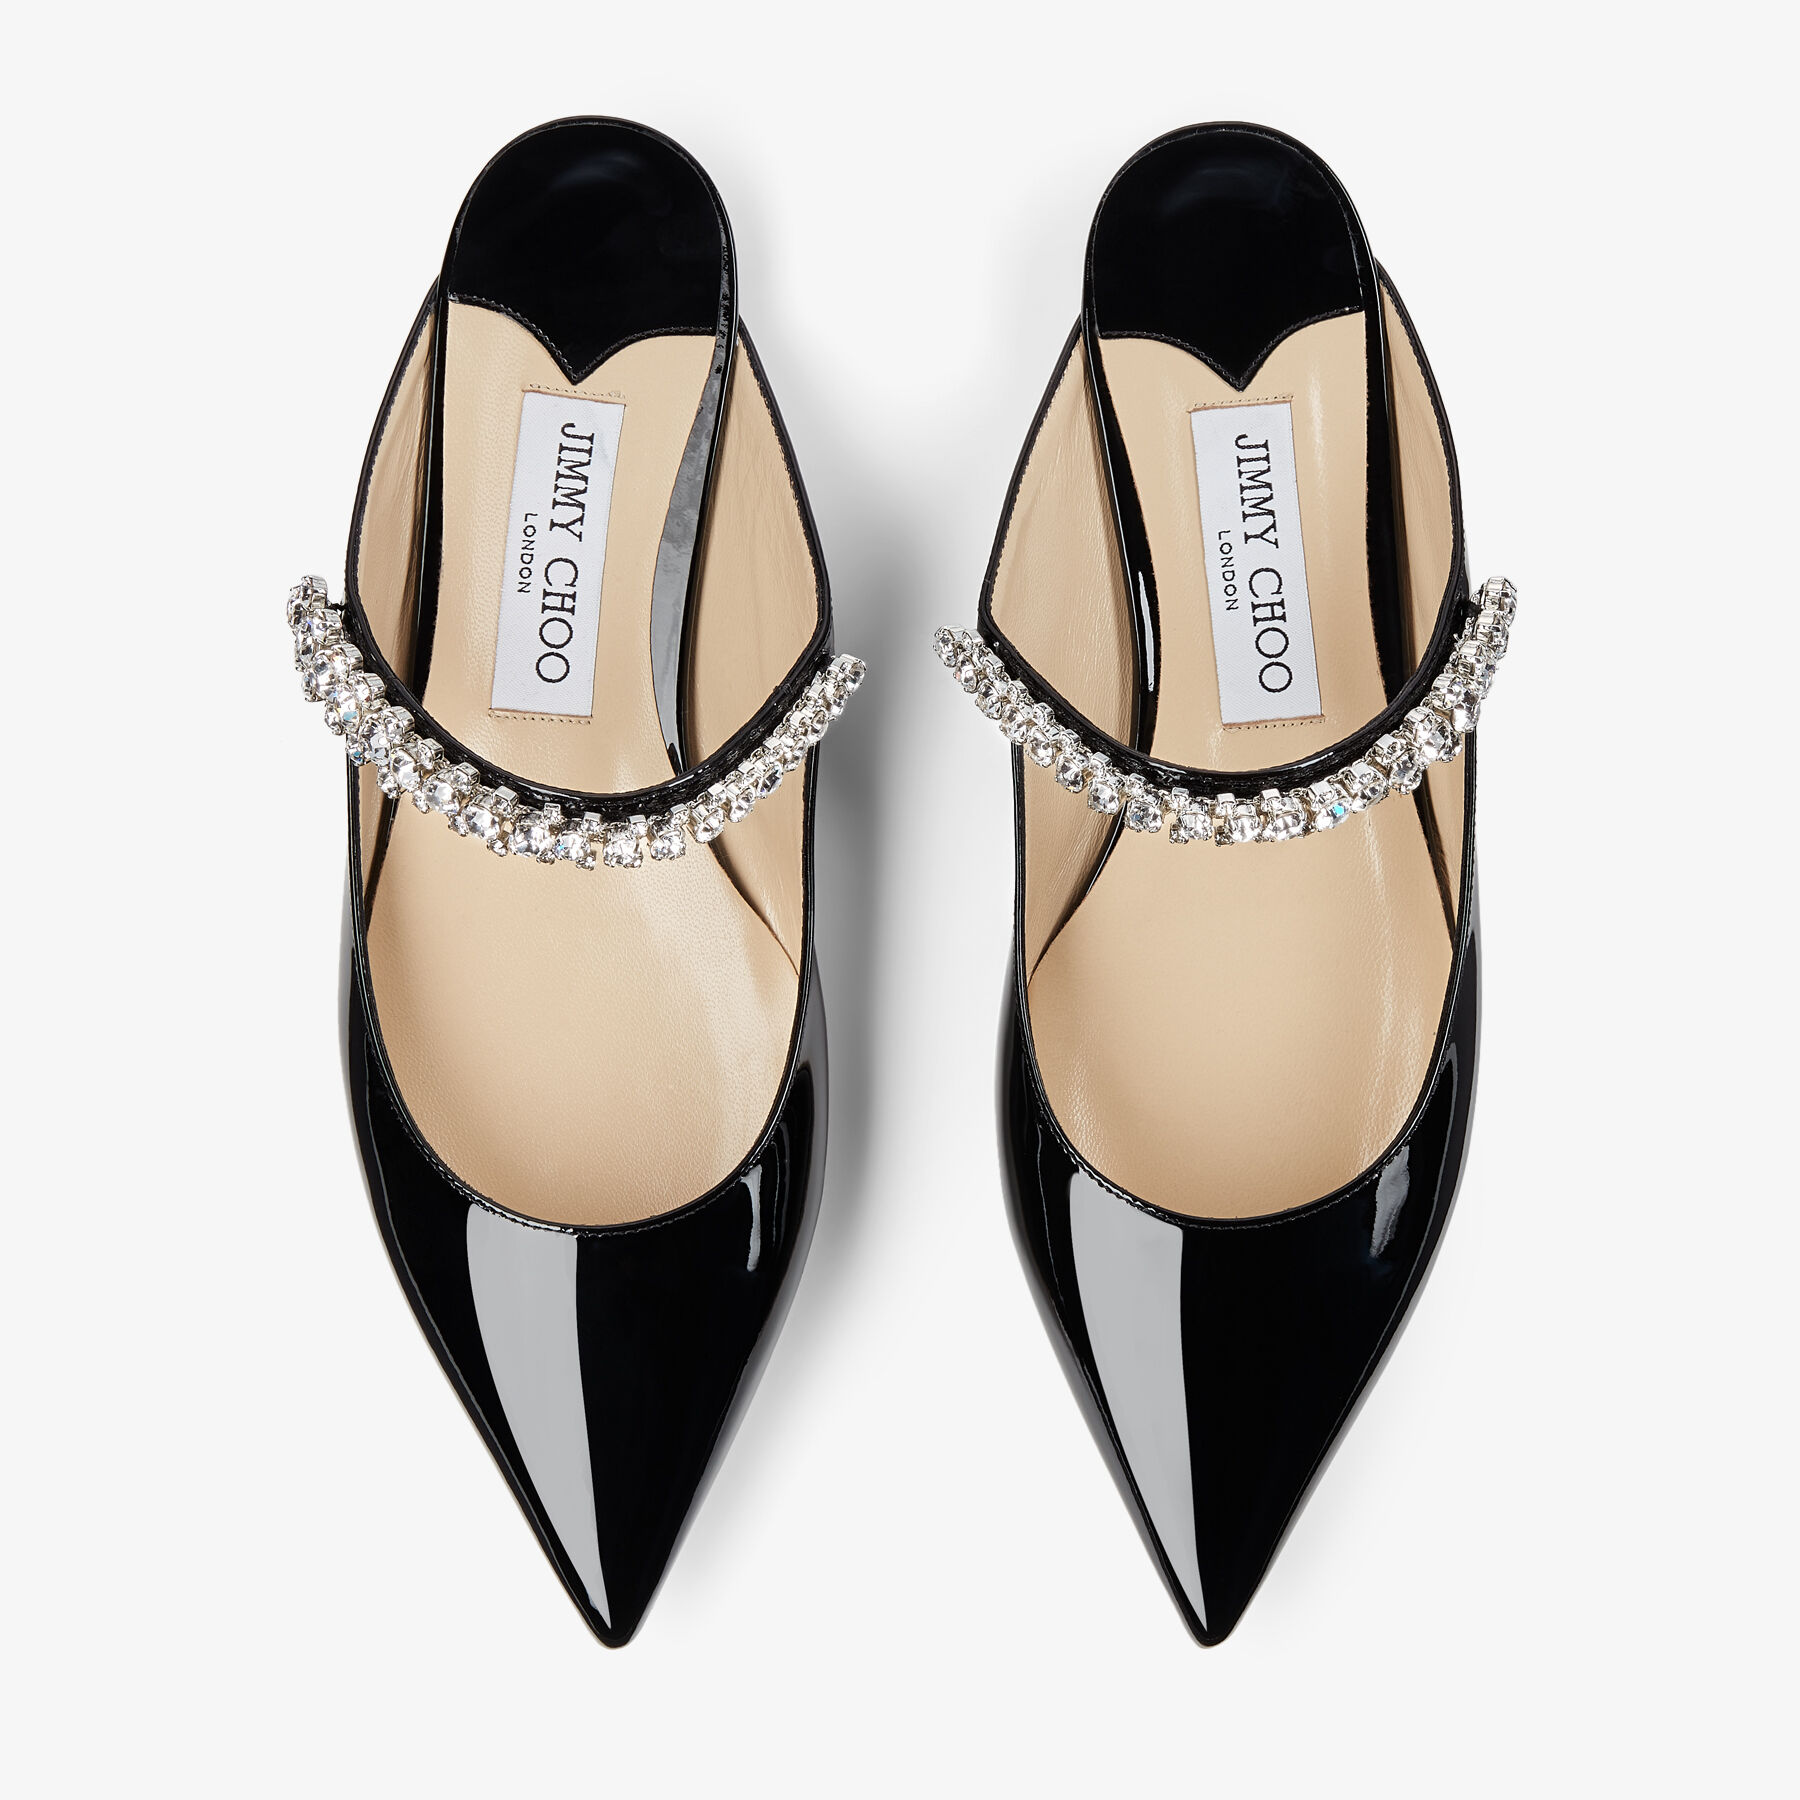 Bing Flat | Black Patent Leather Mules with Crystal Strap | JIMMY CHOO